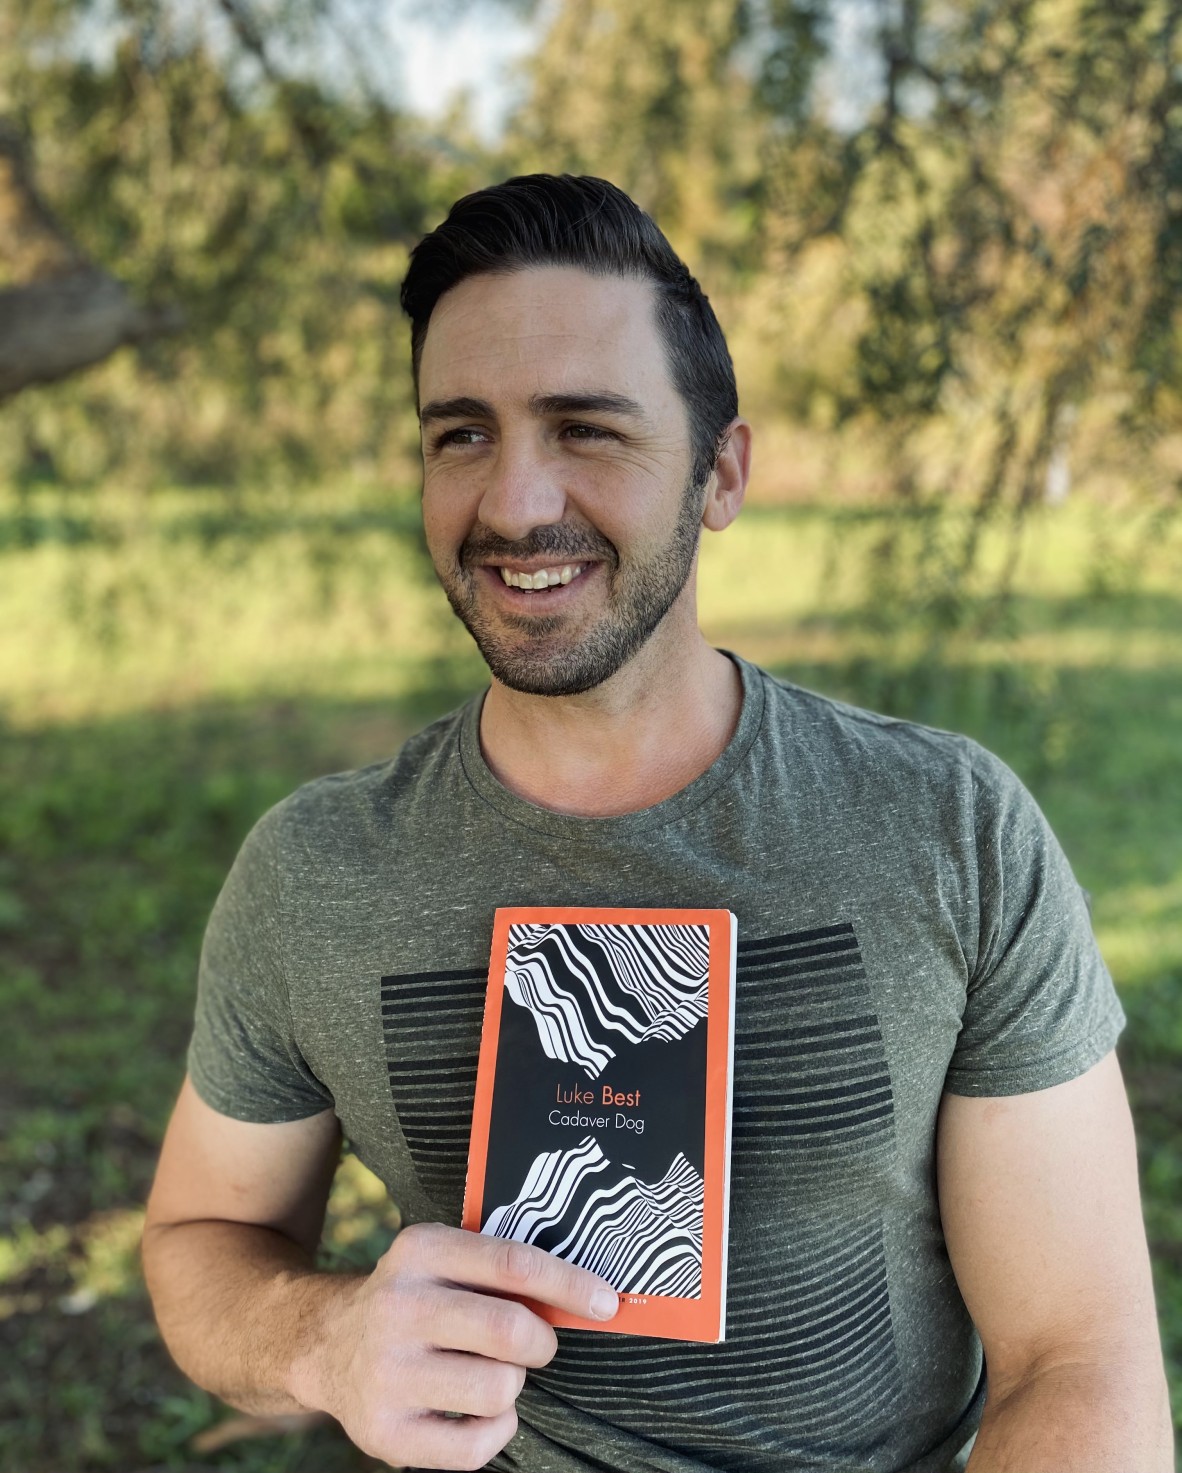 Luke Best stands beneath a tree smiling away from the camera holding his copy of Cadaver Dog